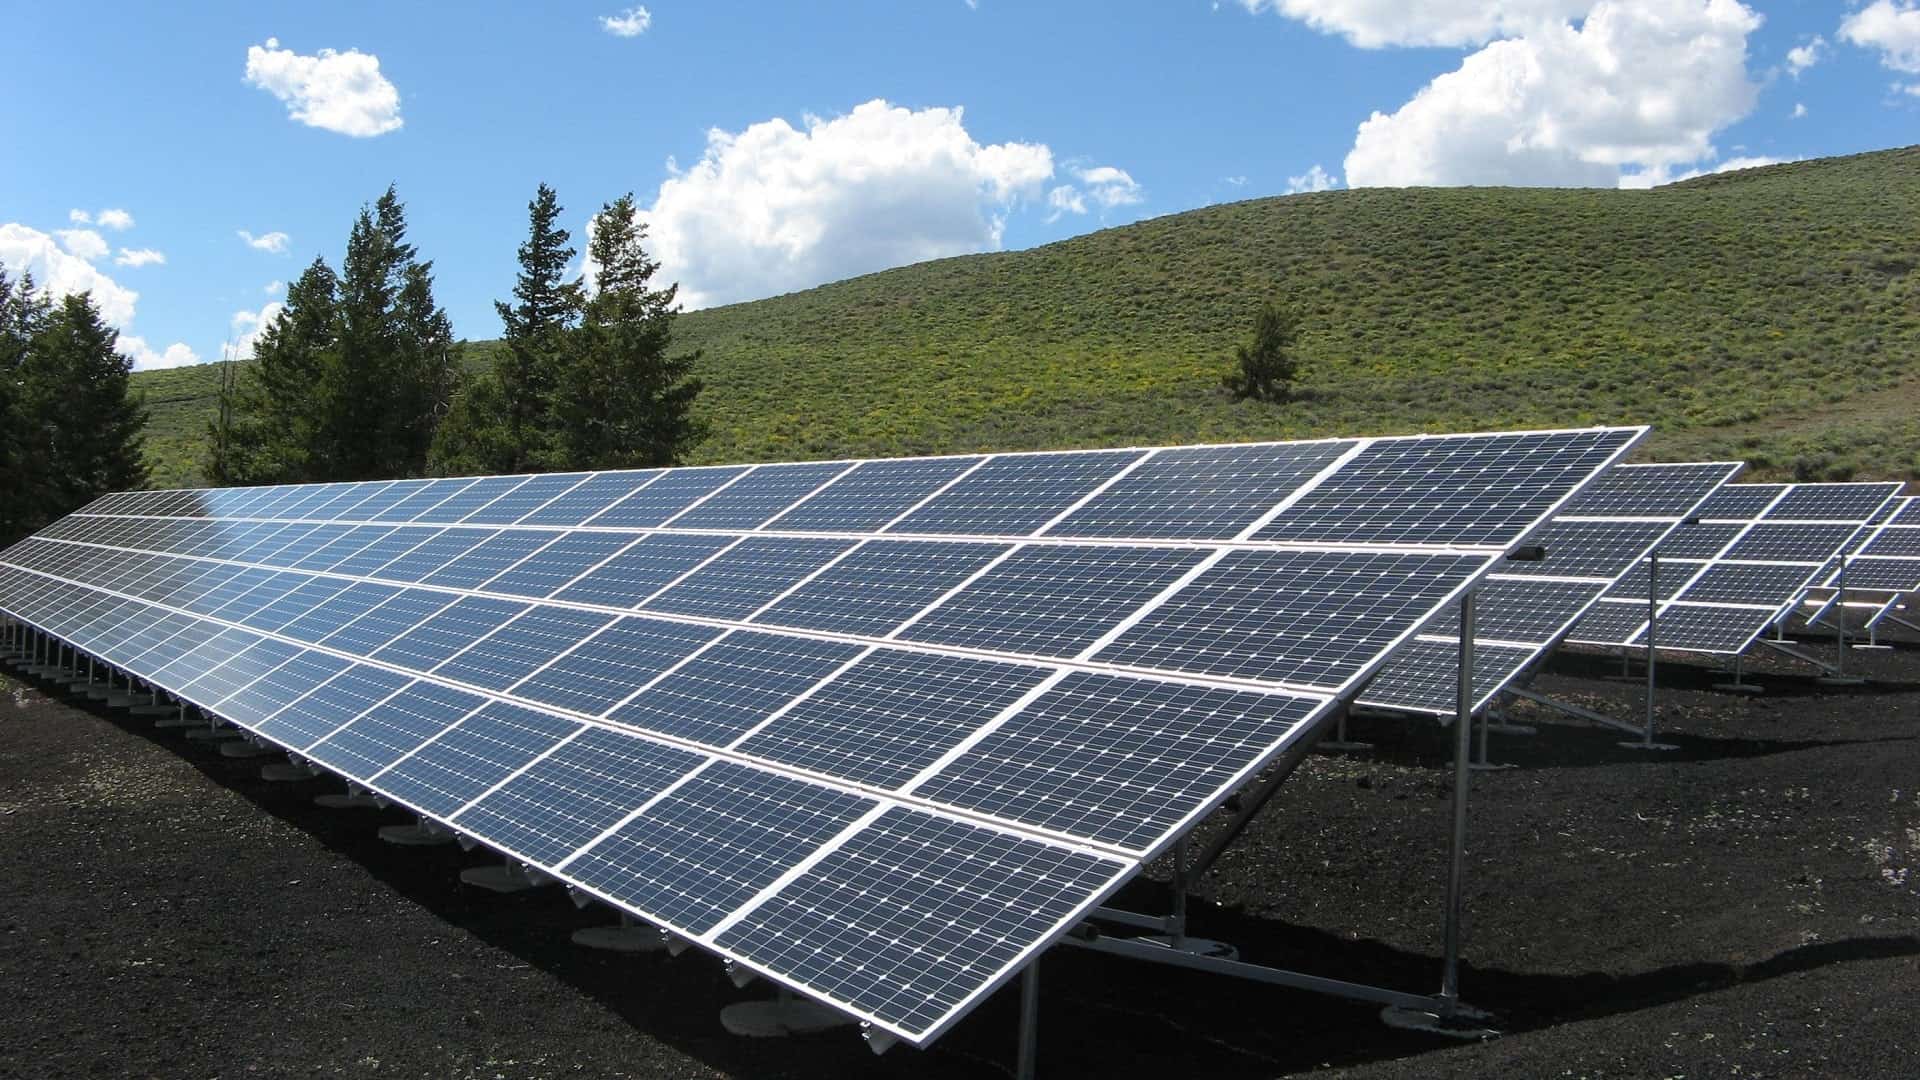 Array of solar panels in front of green hills and blue sky